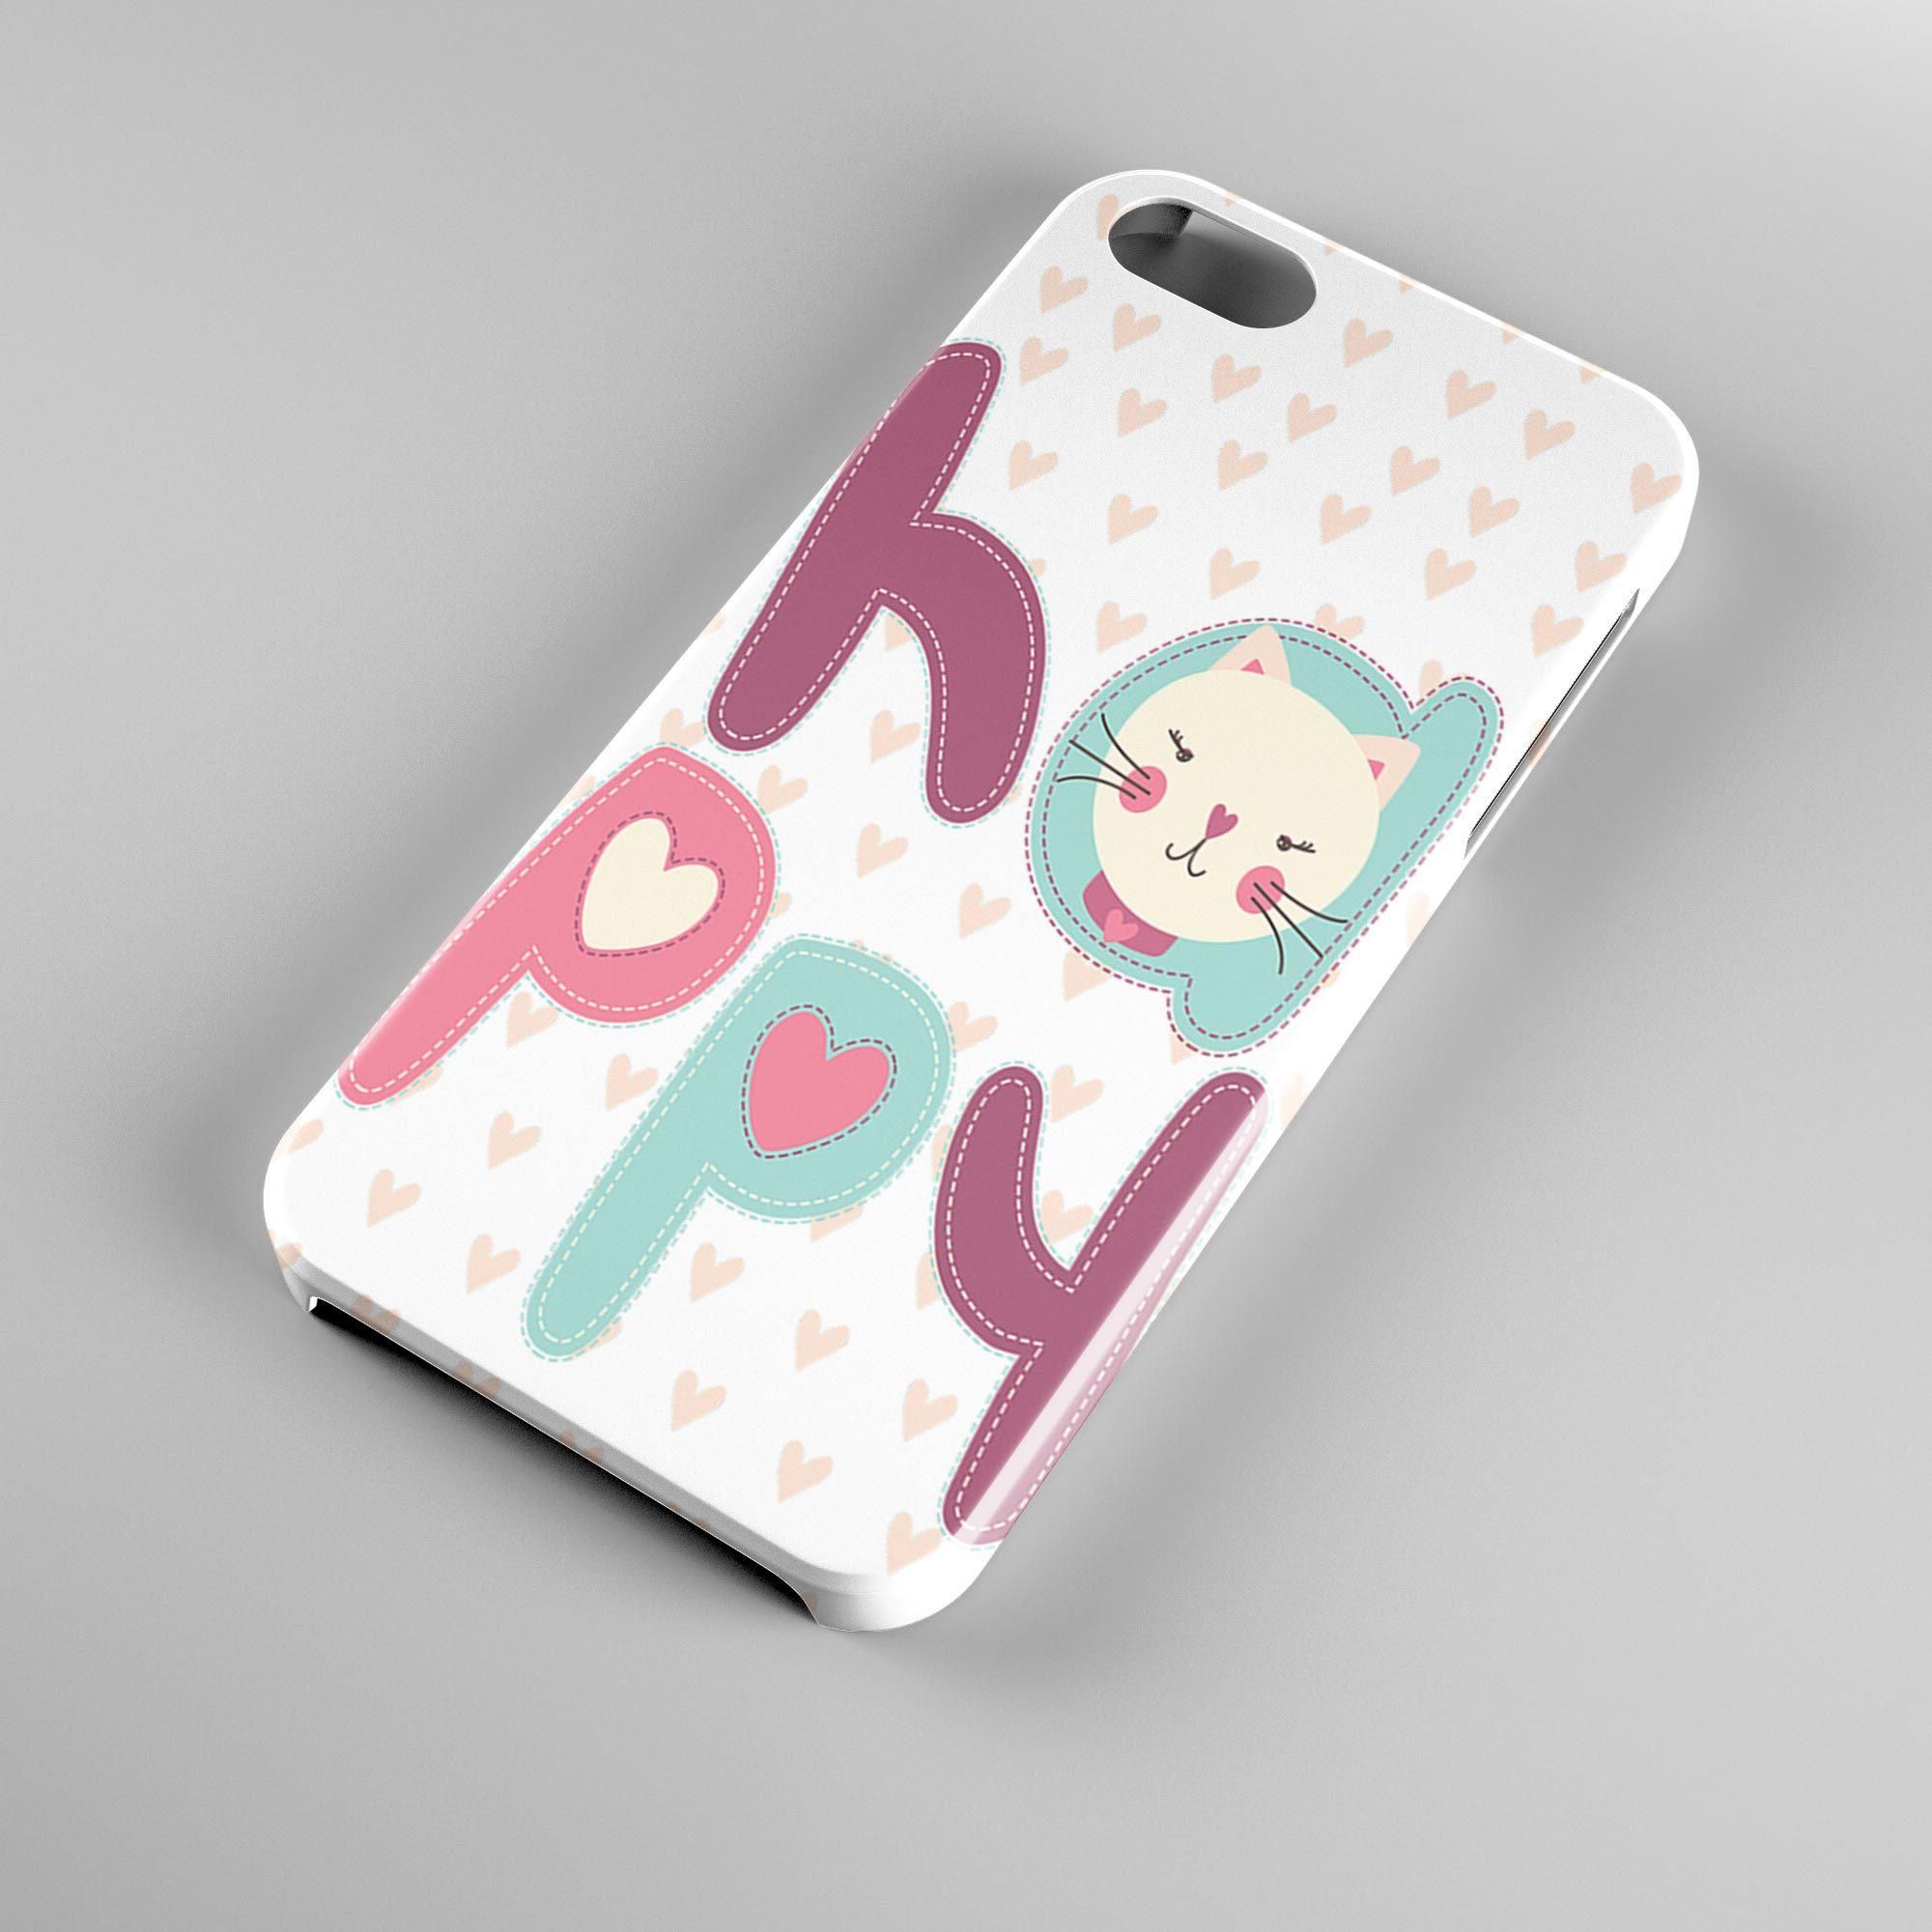 Happy Cat Case With Love Hearts Phone Cover (Covers the edge) for iPhone 5